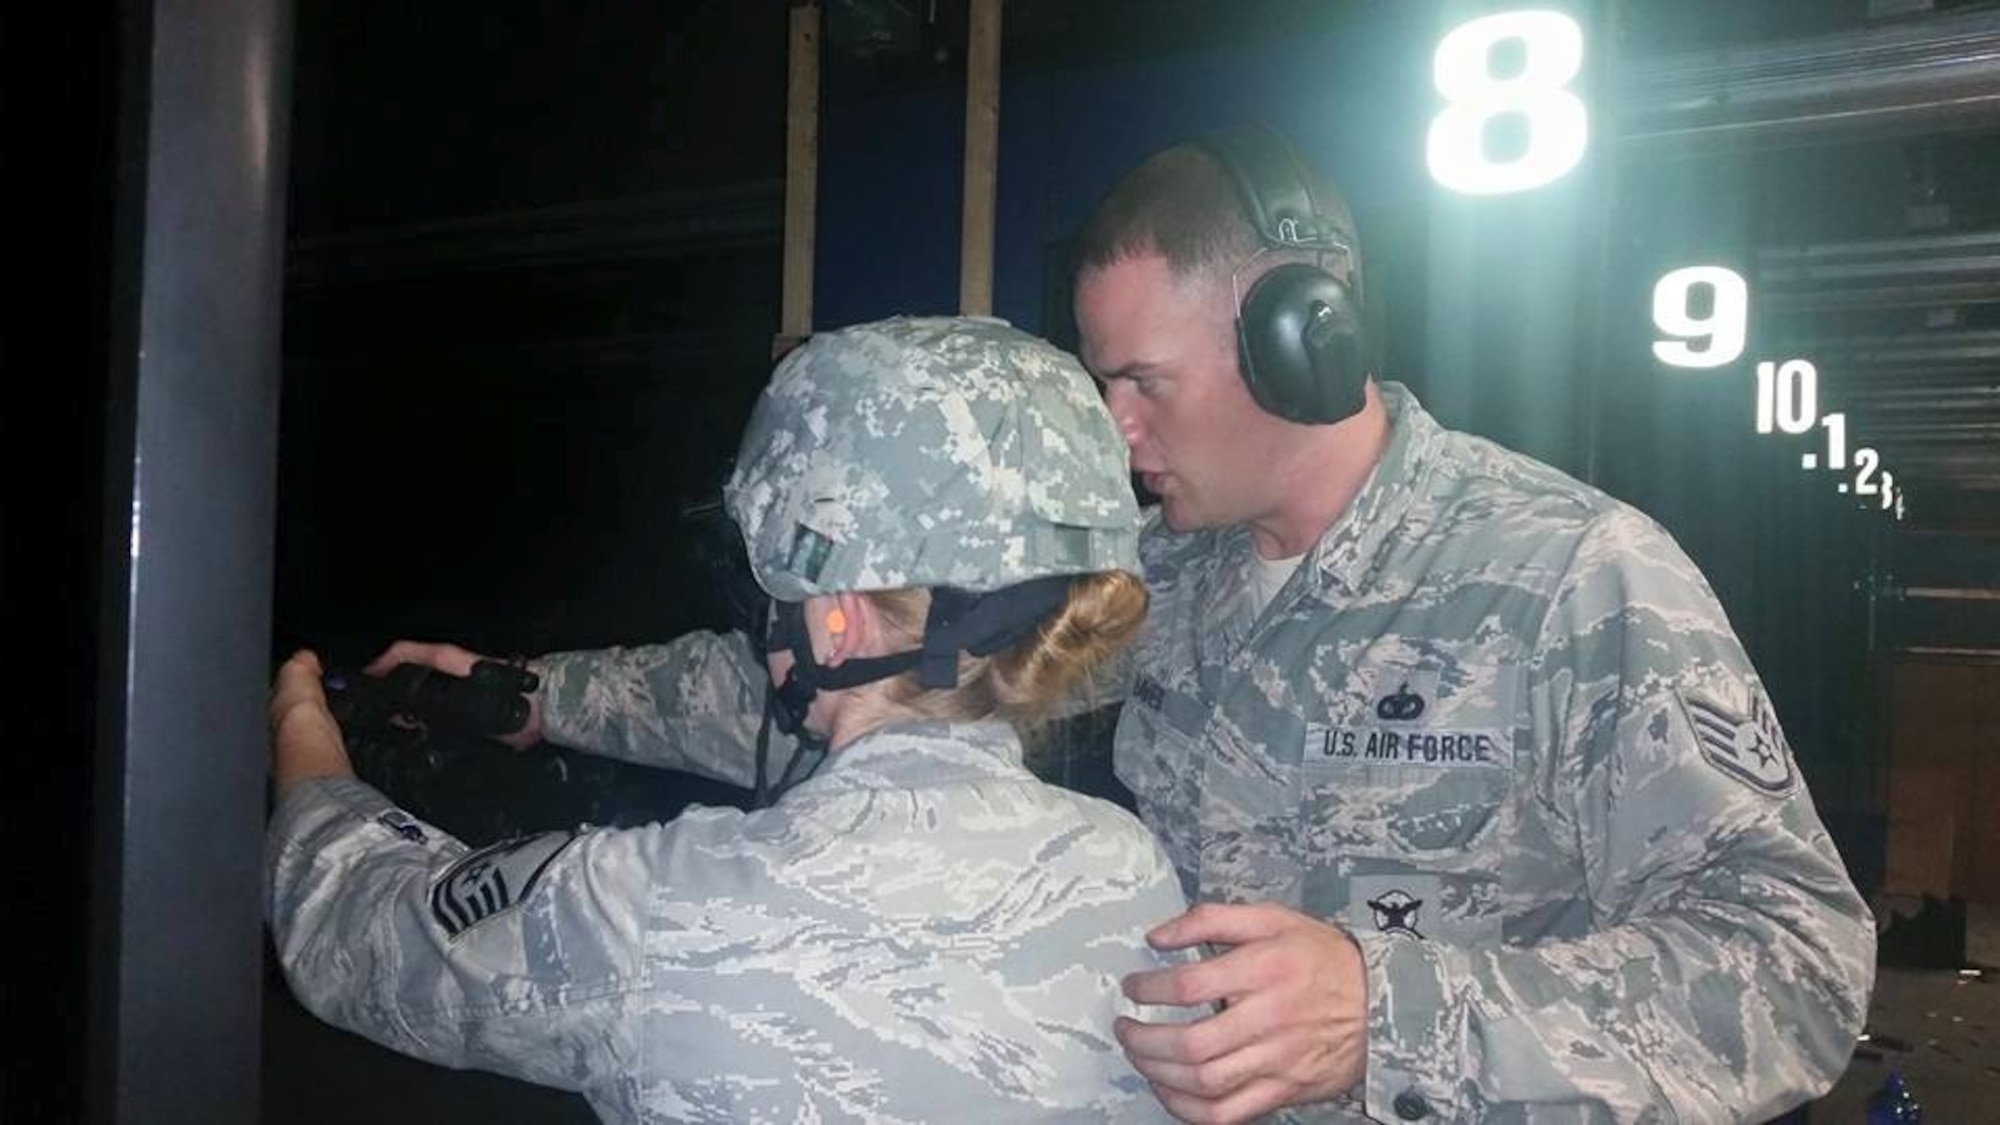 Staff Sgt. Brian Davies assists Master Sgt. Susan Flannery as she shoots using night vision goggles and a targeting laser at the Enfield Department of Corrections indoor firing range Aug. 1, 2015.  (U.S. Air National Guard photos by Tech. Sgt. Jessica Roy)